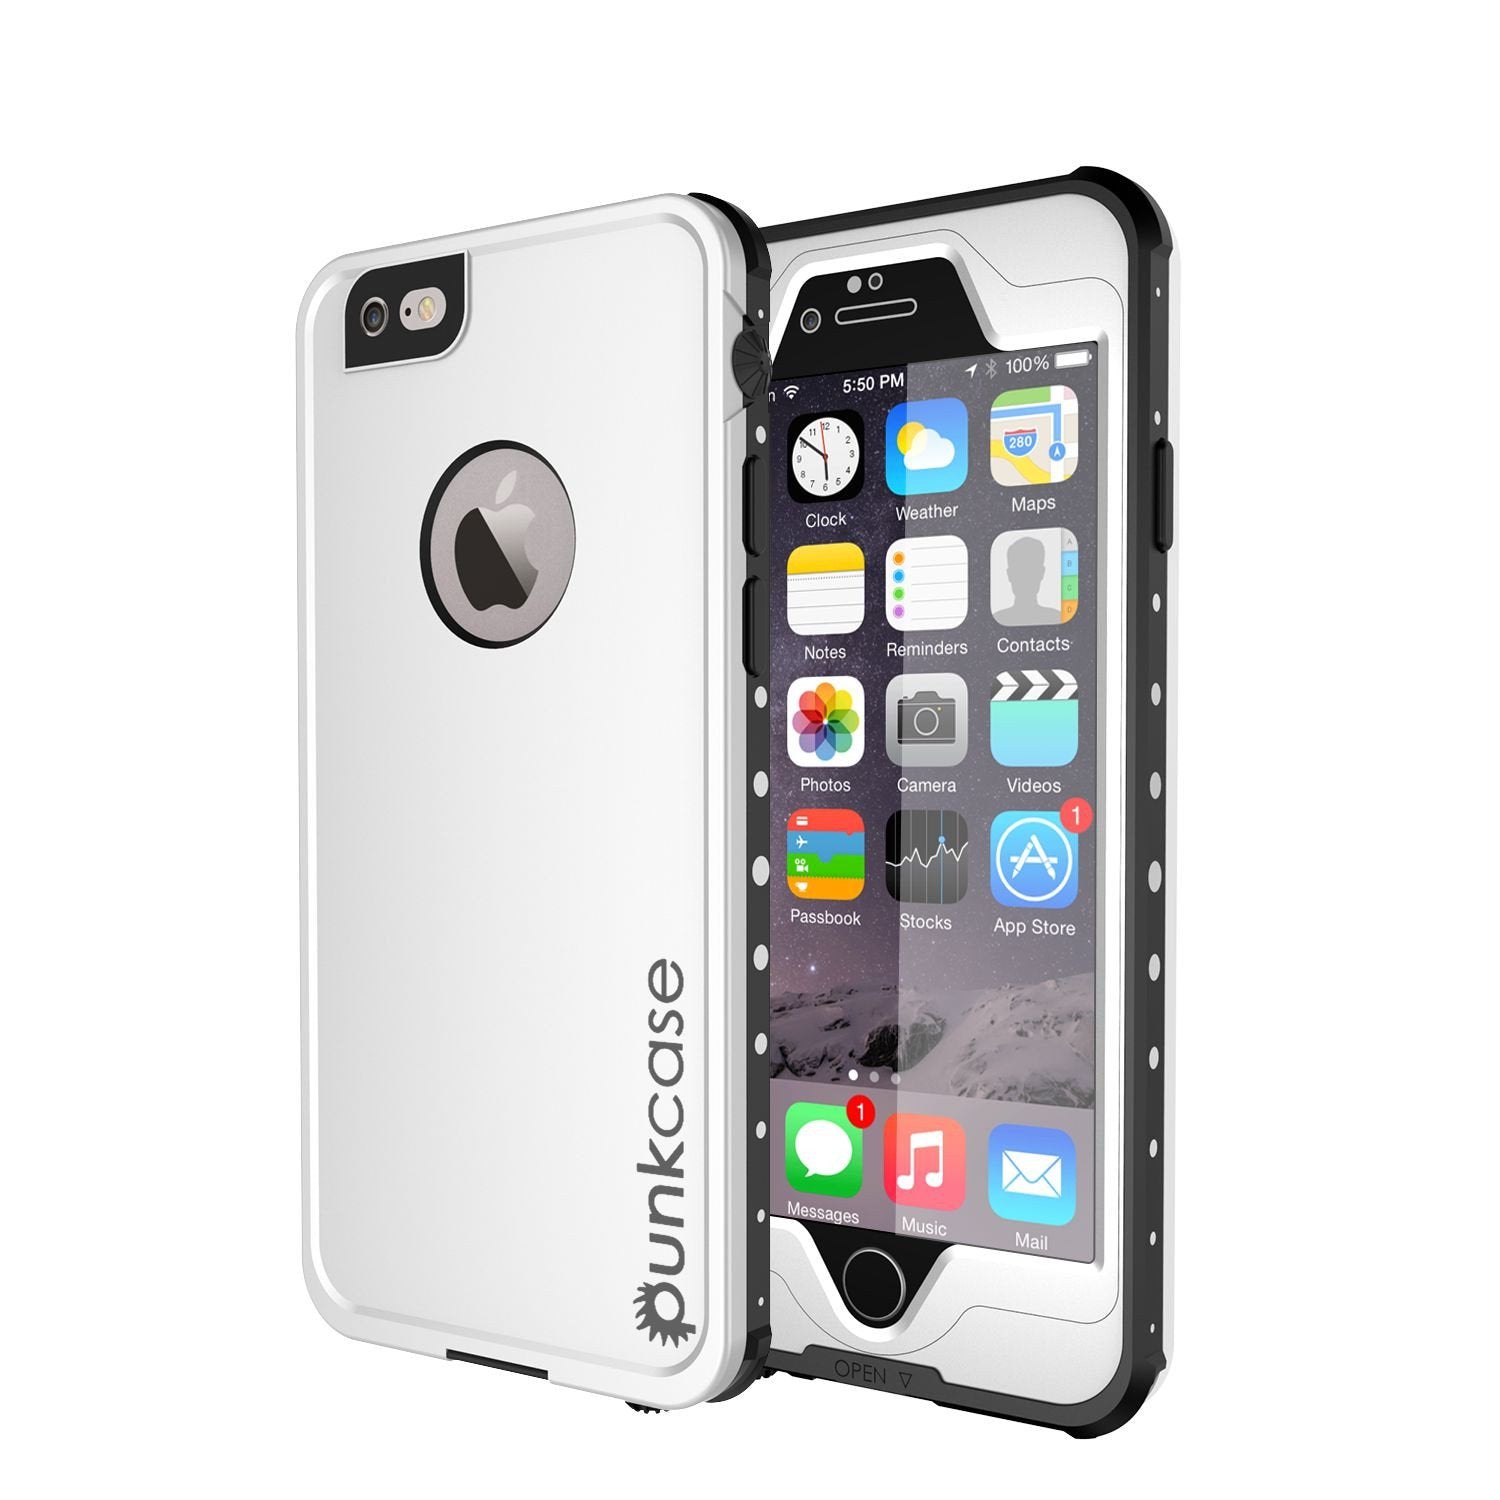 iPhone 6s/6 Waterproof Case PunkCase StudStar White w/ Attached Screen Protector | Lifetime Warranty